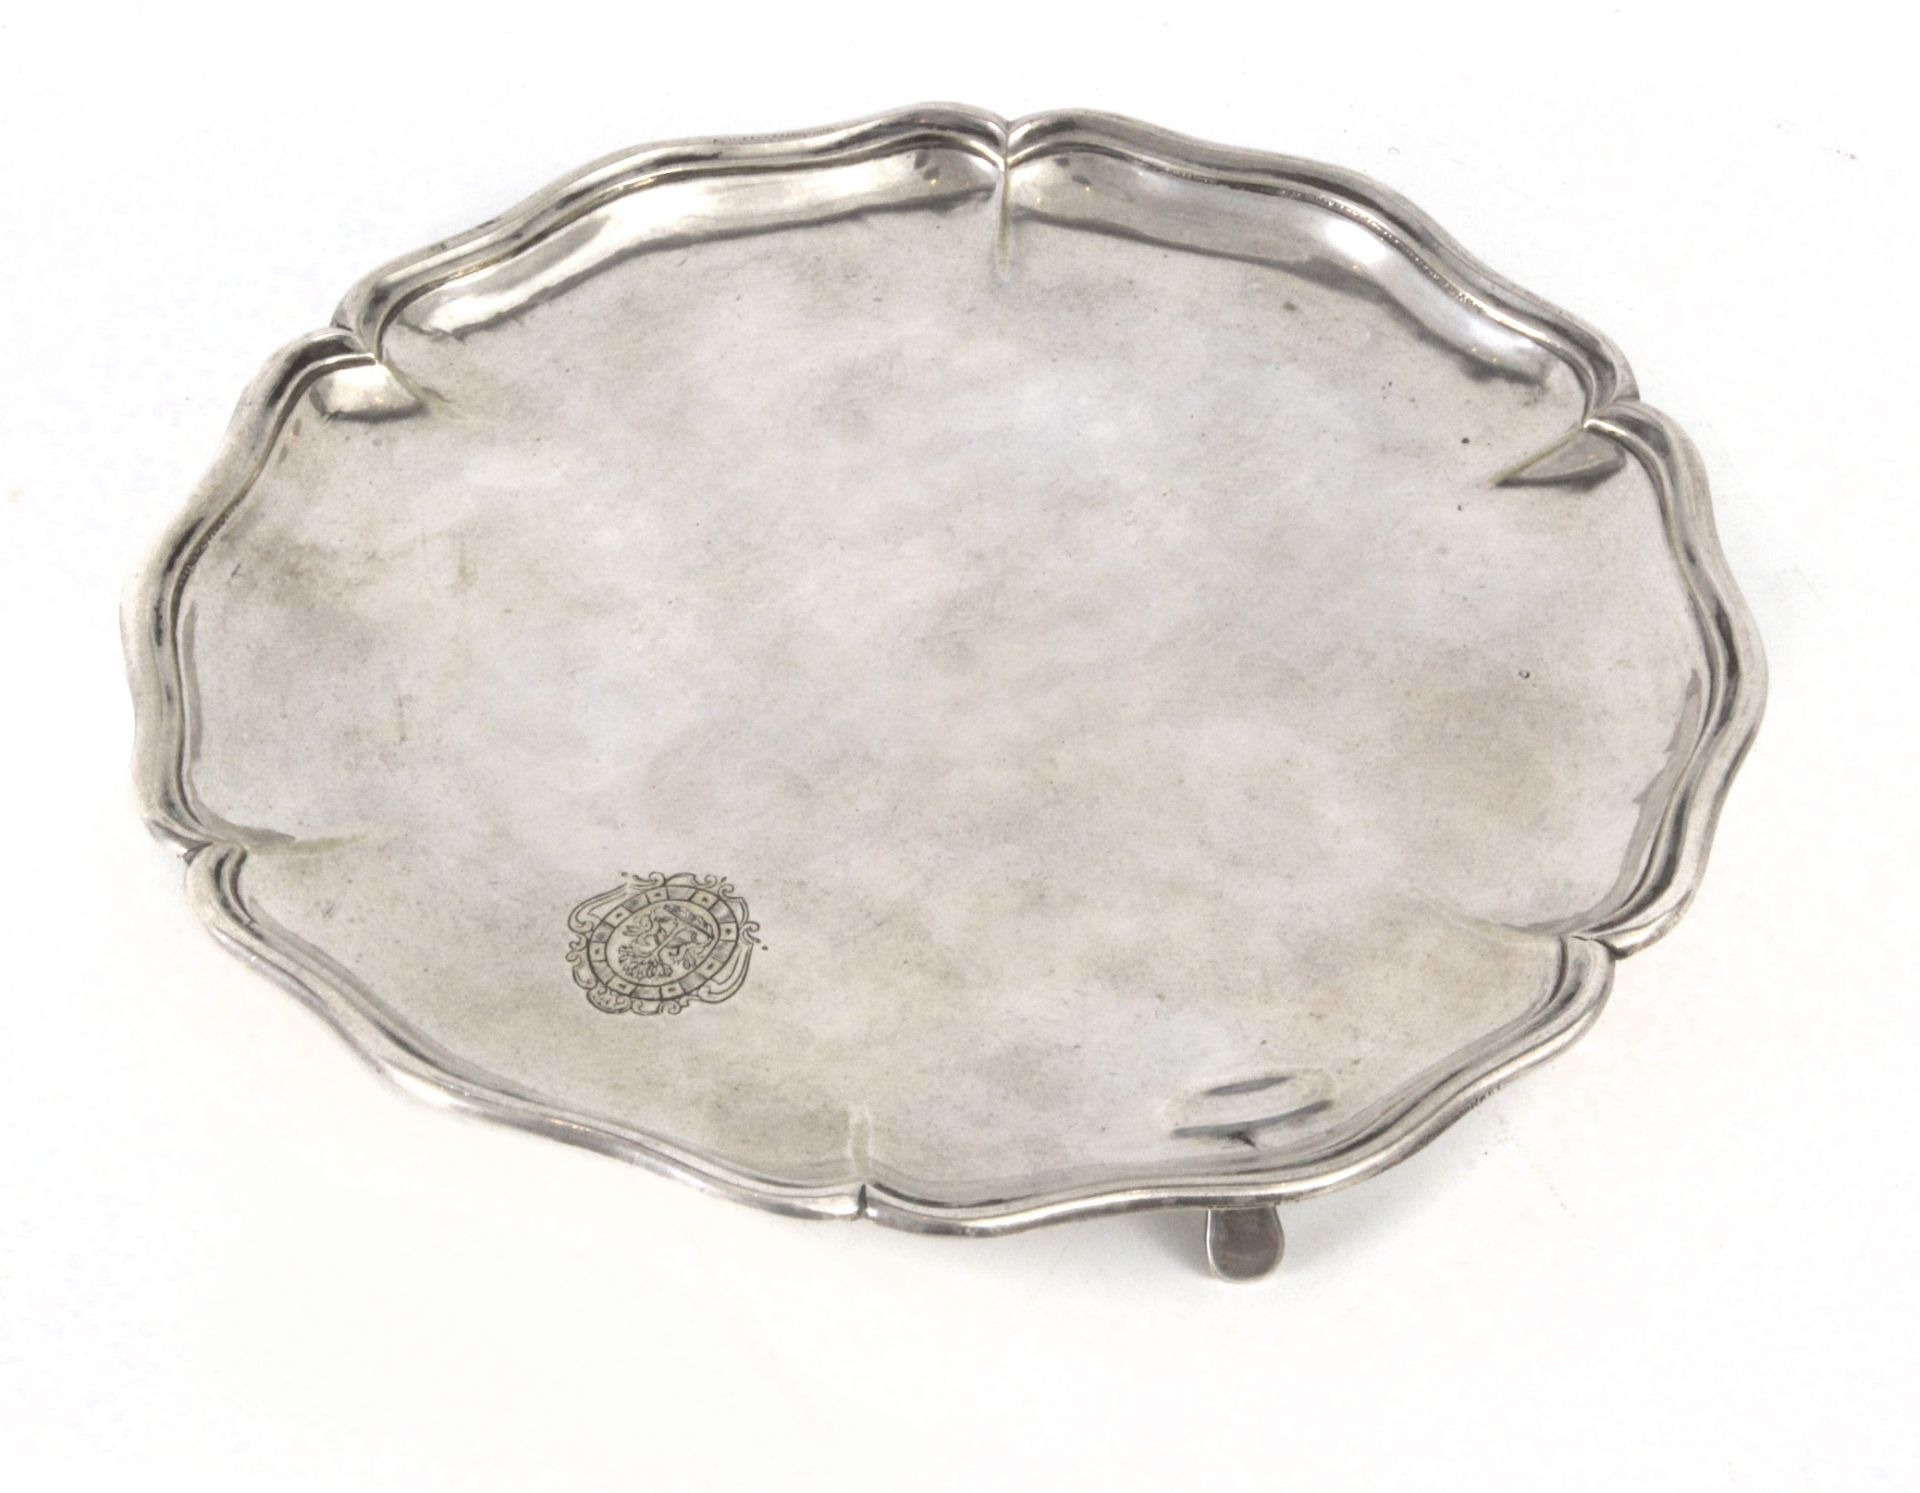 A late 18th century-early 19th century silver tray with hallmarks from Barcelona